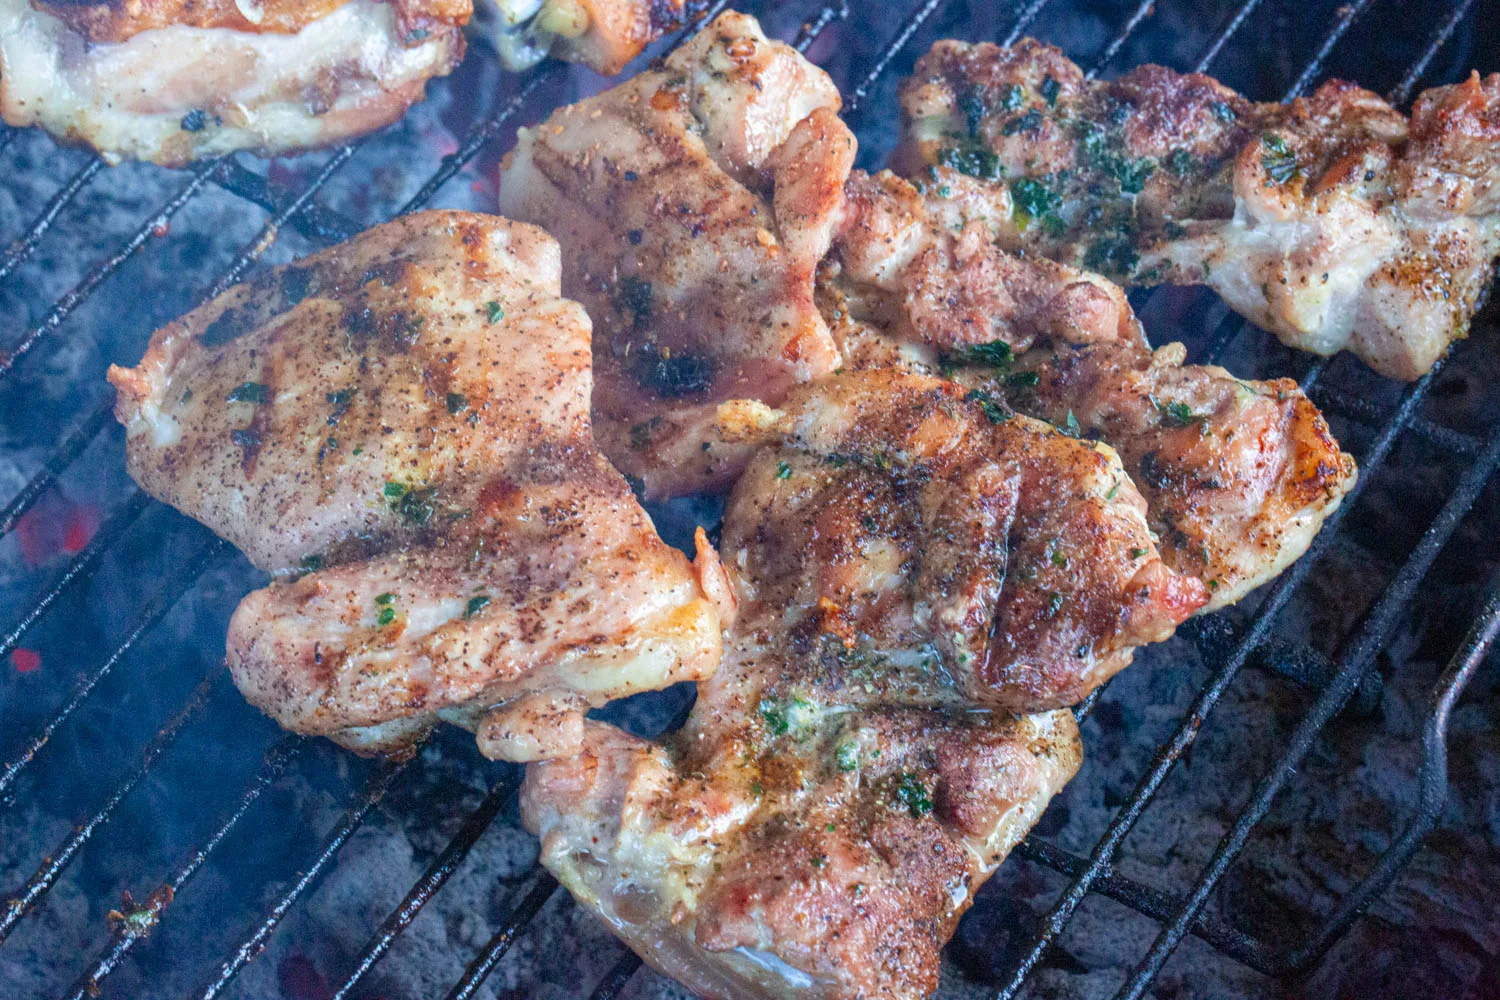 Boneless chicken thighs grilling over hot charcoal